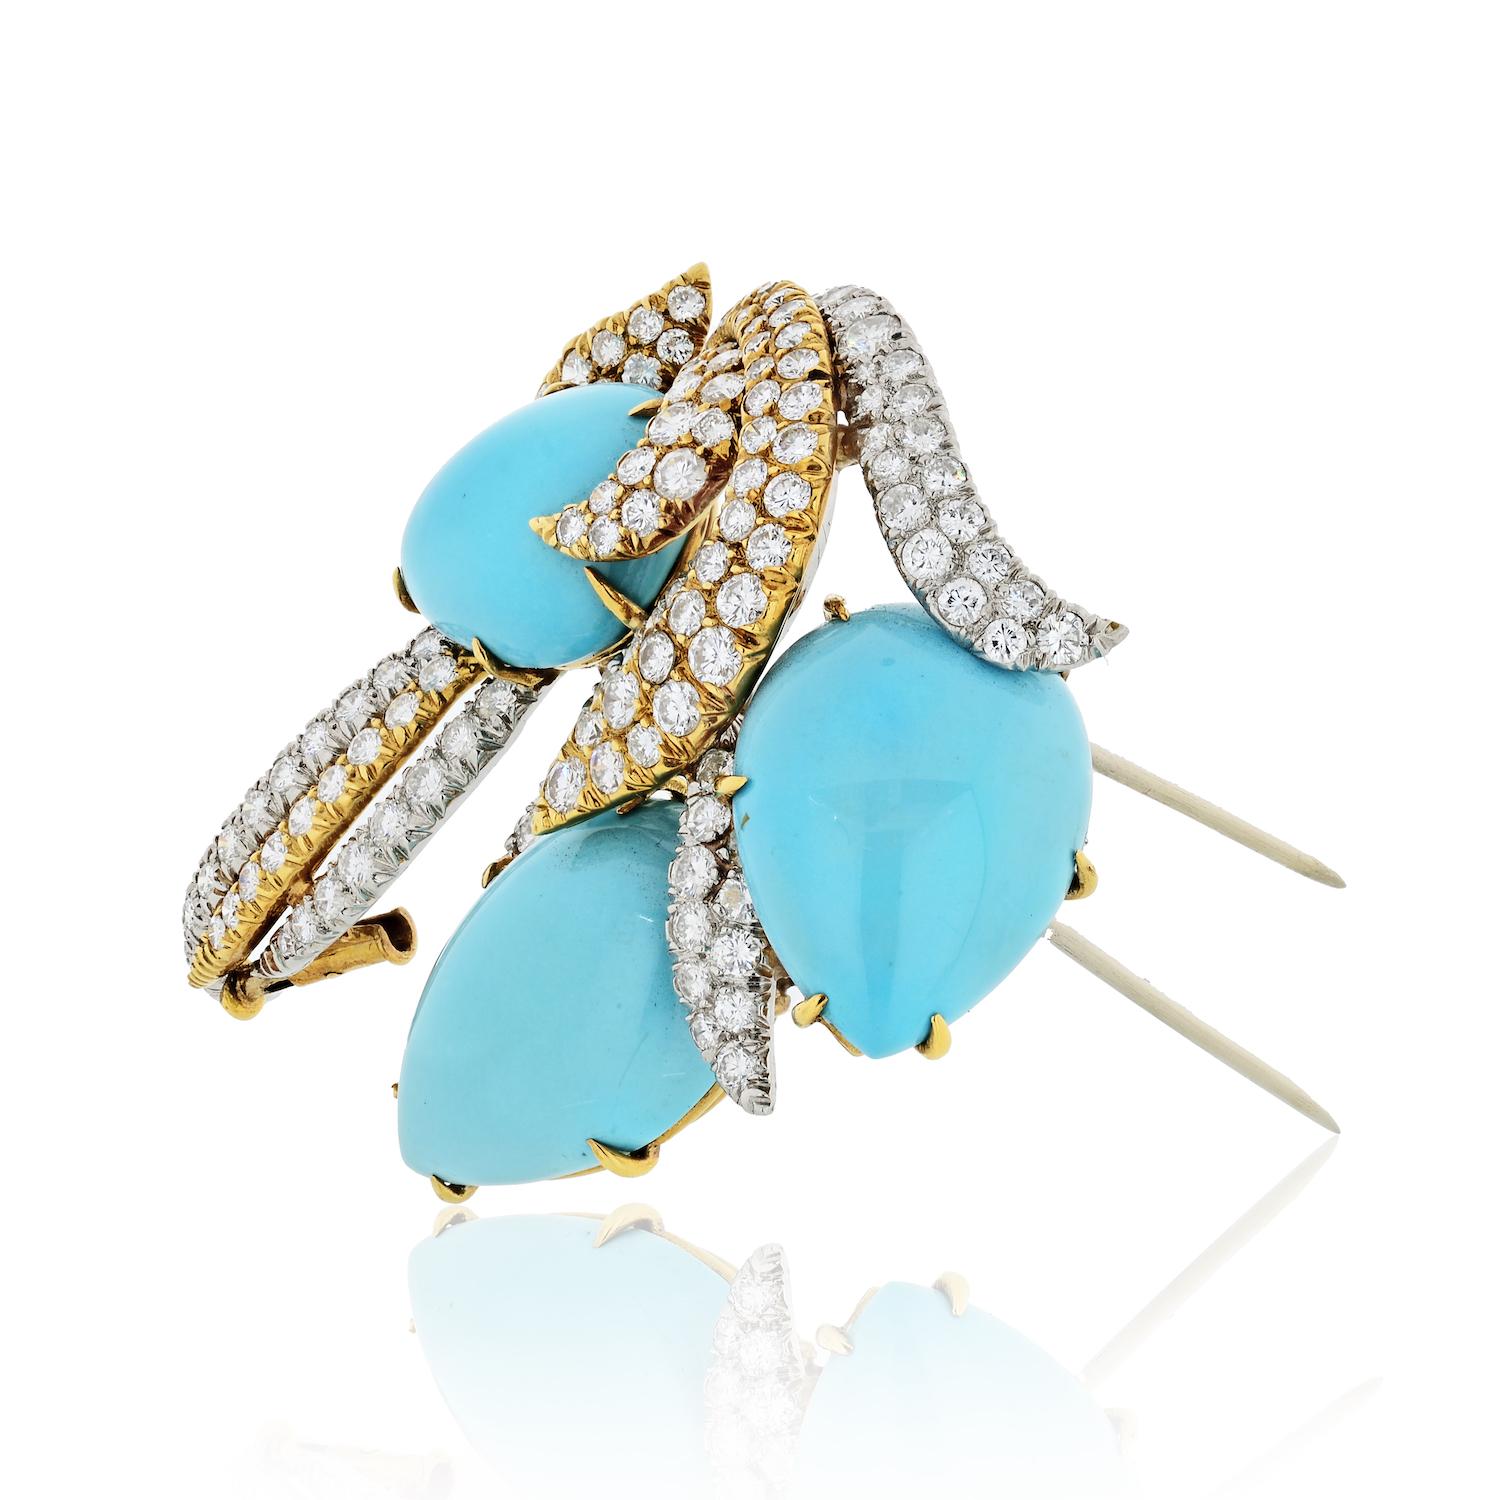 Stunning turquoise and diamond clip created by David Webb in the 1980s. It can also be worn as a pendant. Chic and elegant, the piece is a great addition to your jewelry collection.
The brooch is made of platinum and 18 karat yellow gold, features